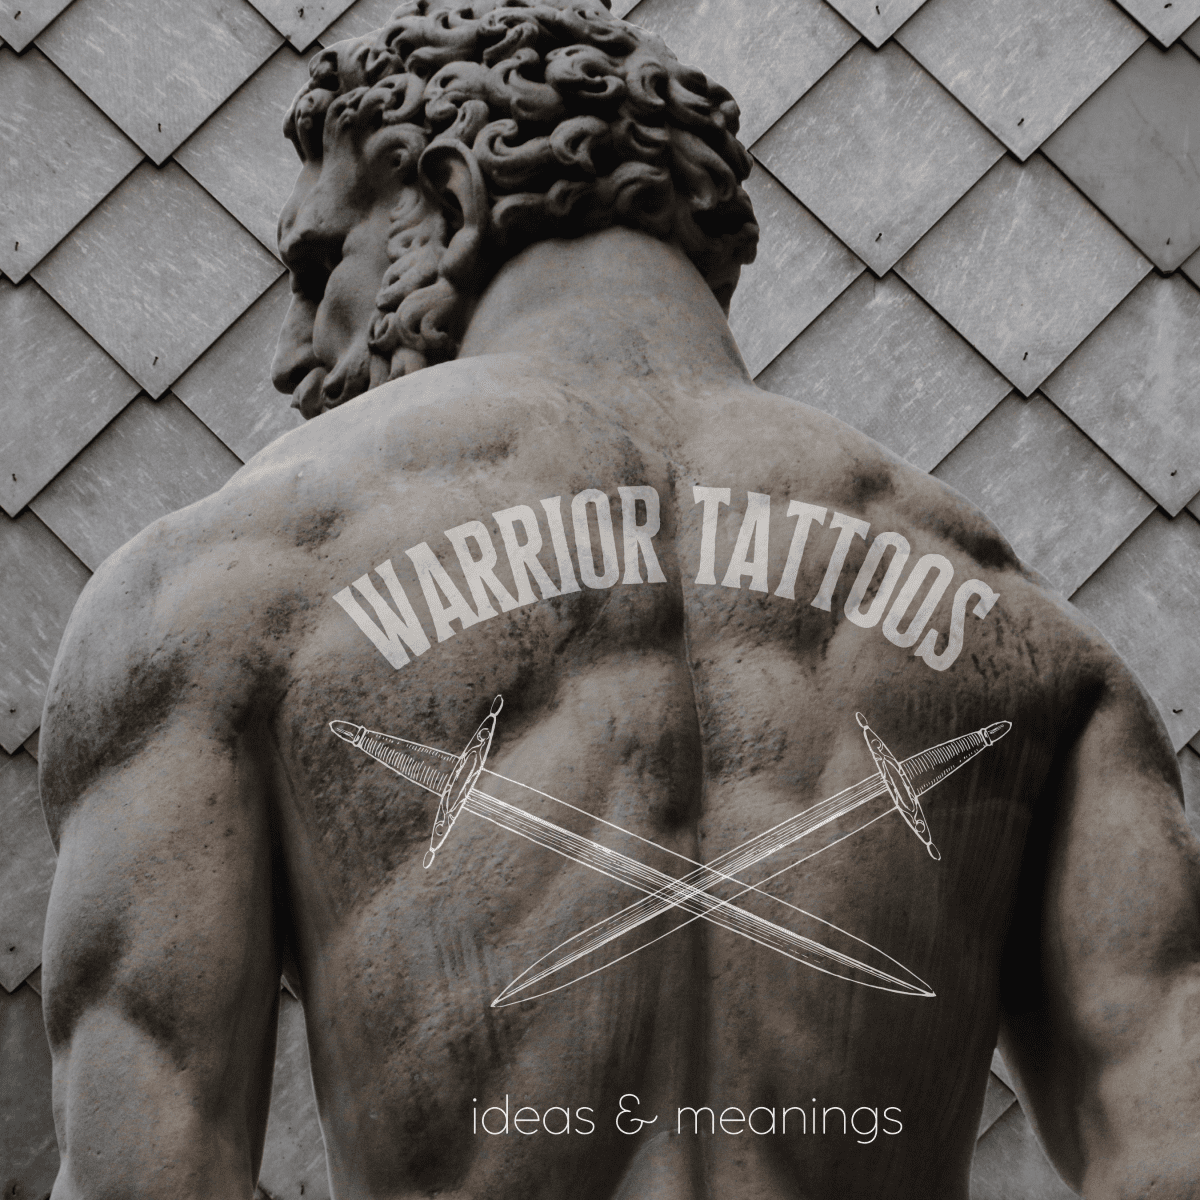 Warrior Tattoo Designs and Meanings - TatRing